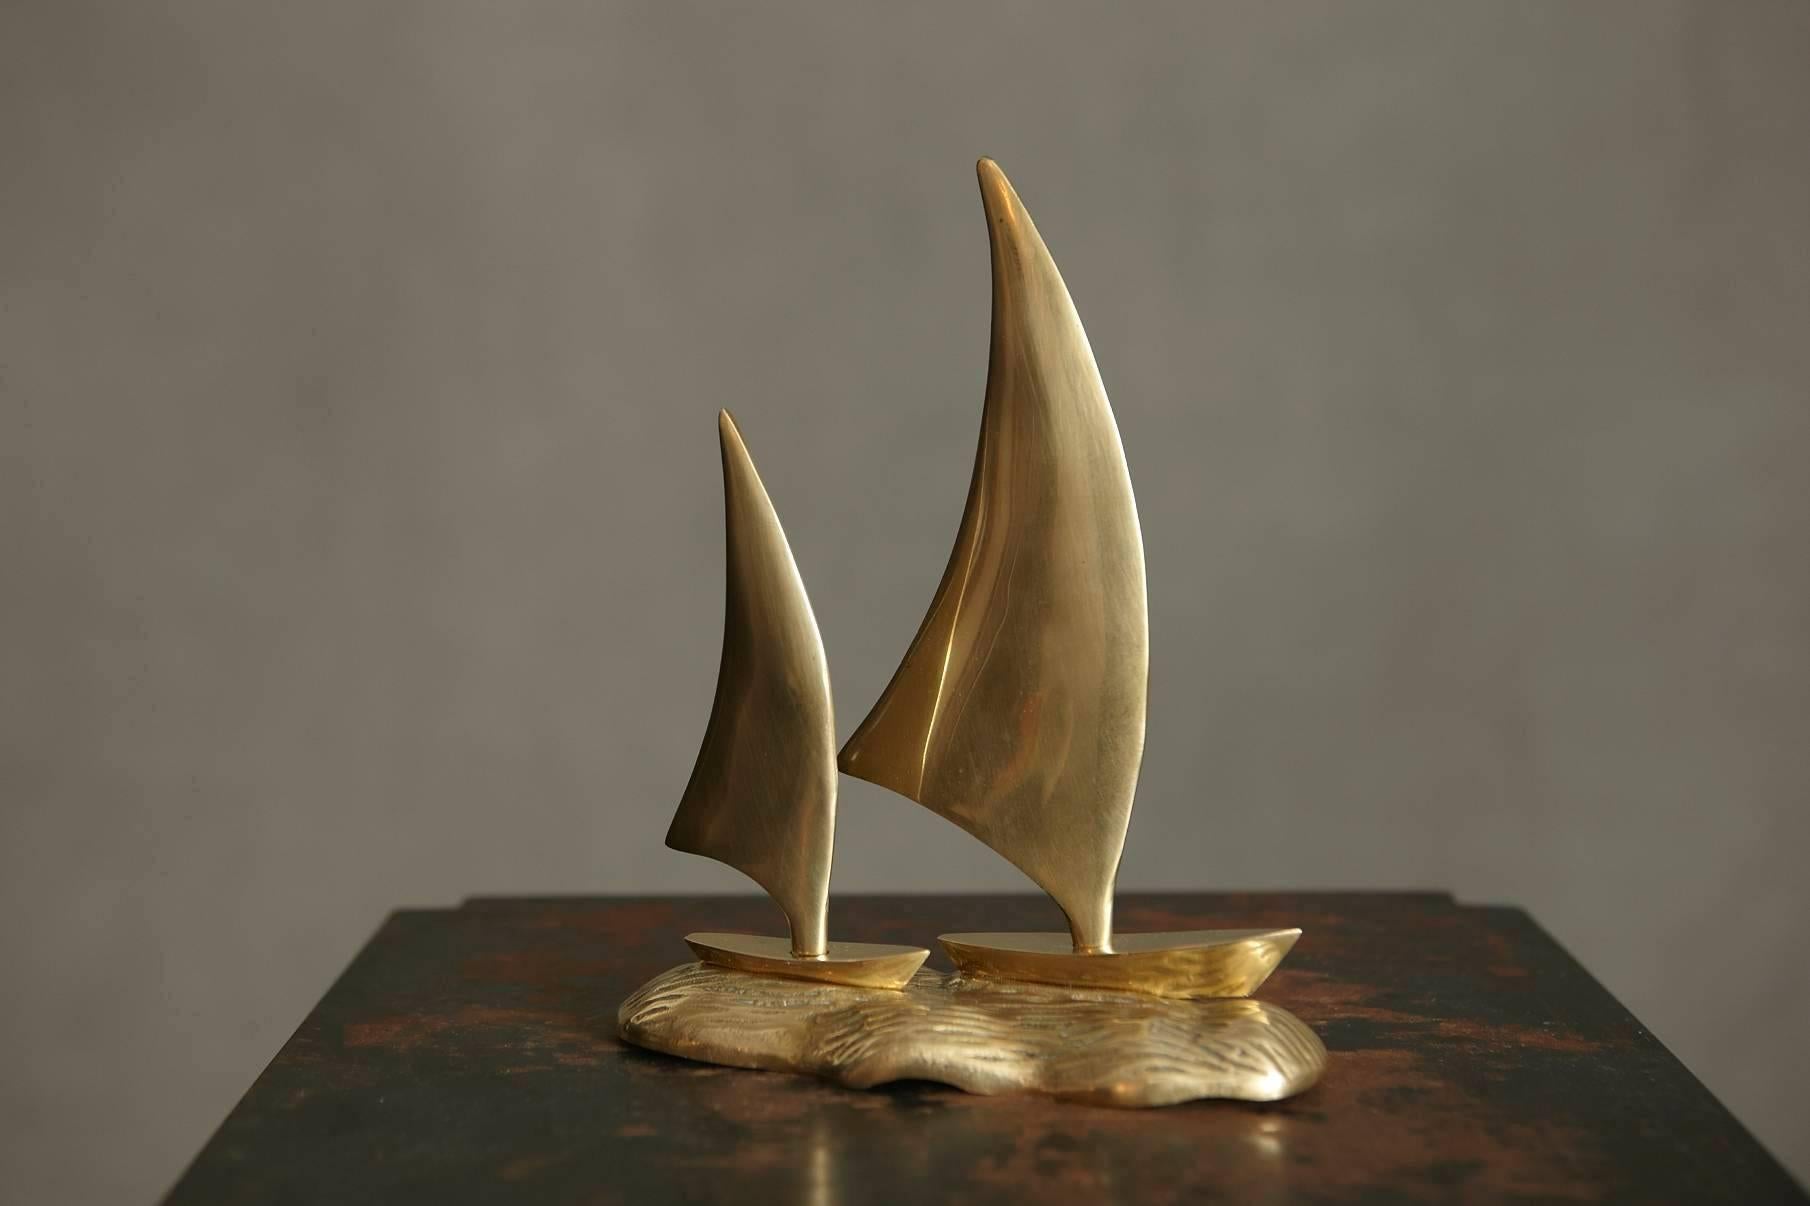 Beautiful little sculpture of a pair of brass sailboats gliding on the waves.
Solid brass, circa 1960s.